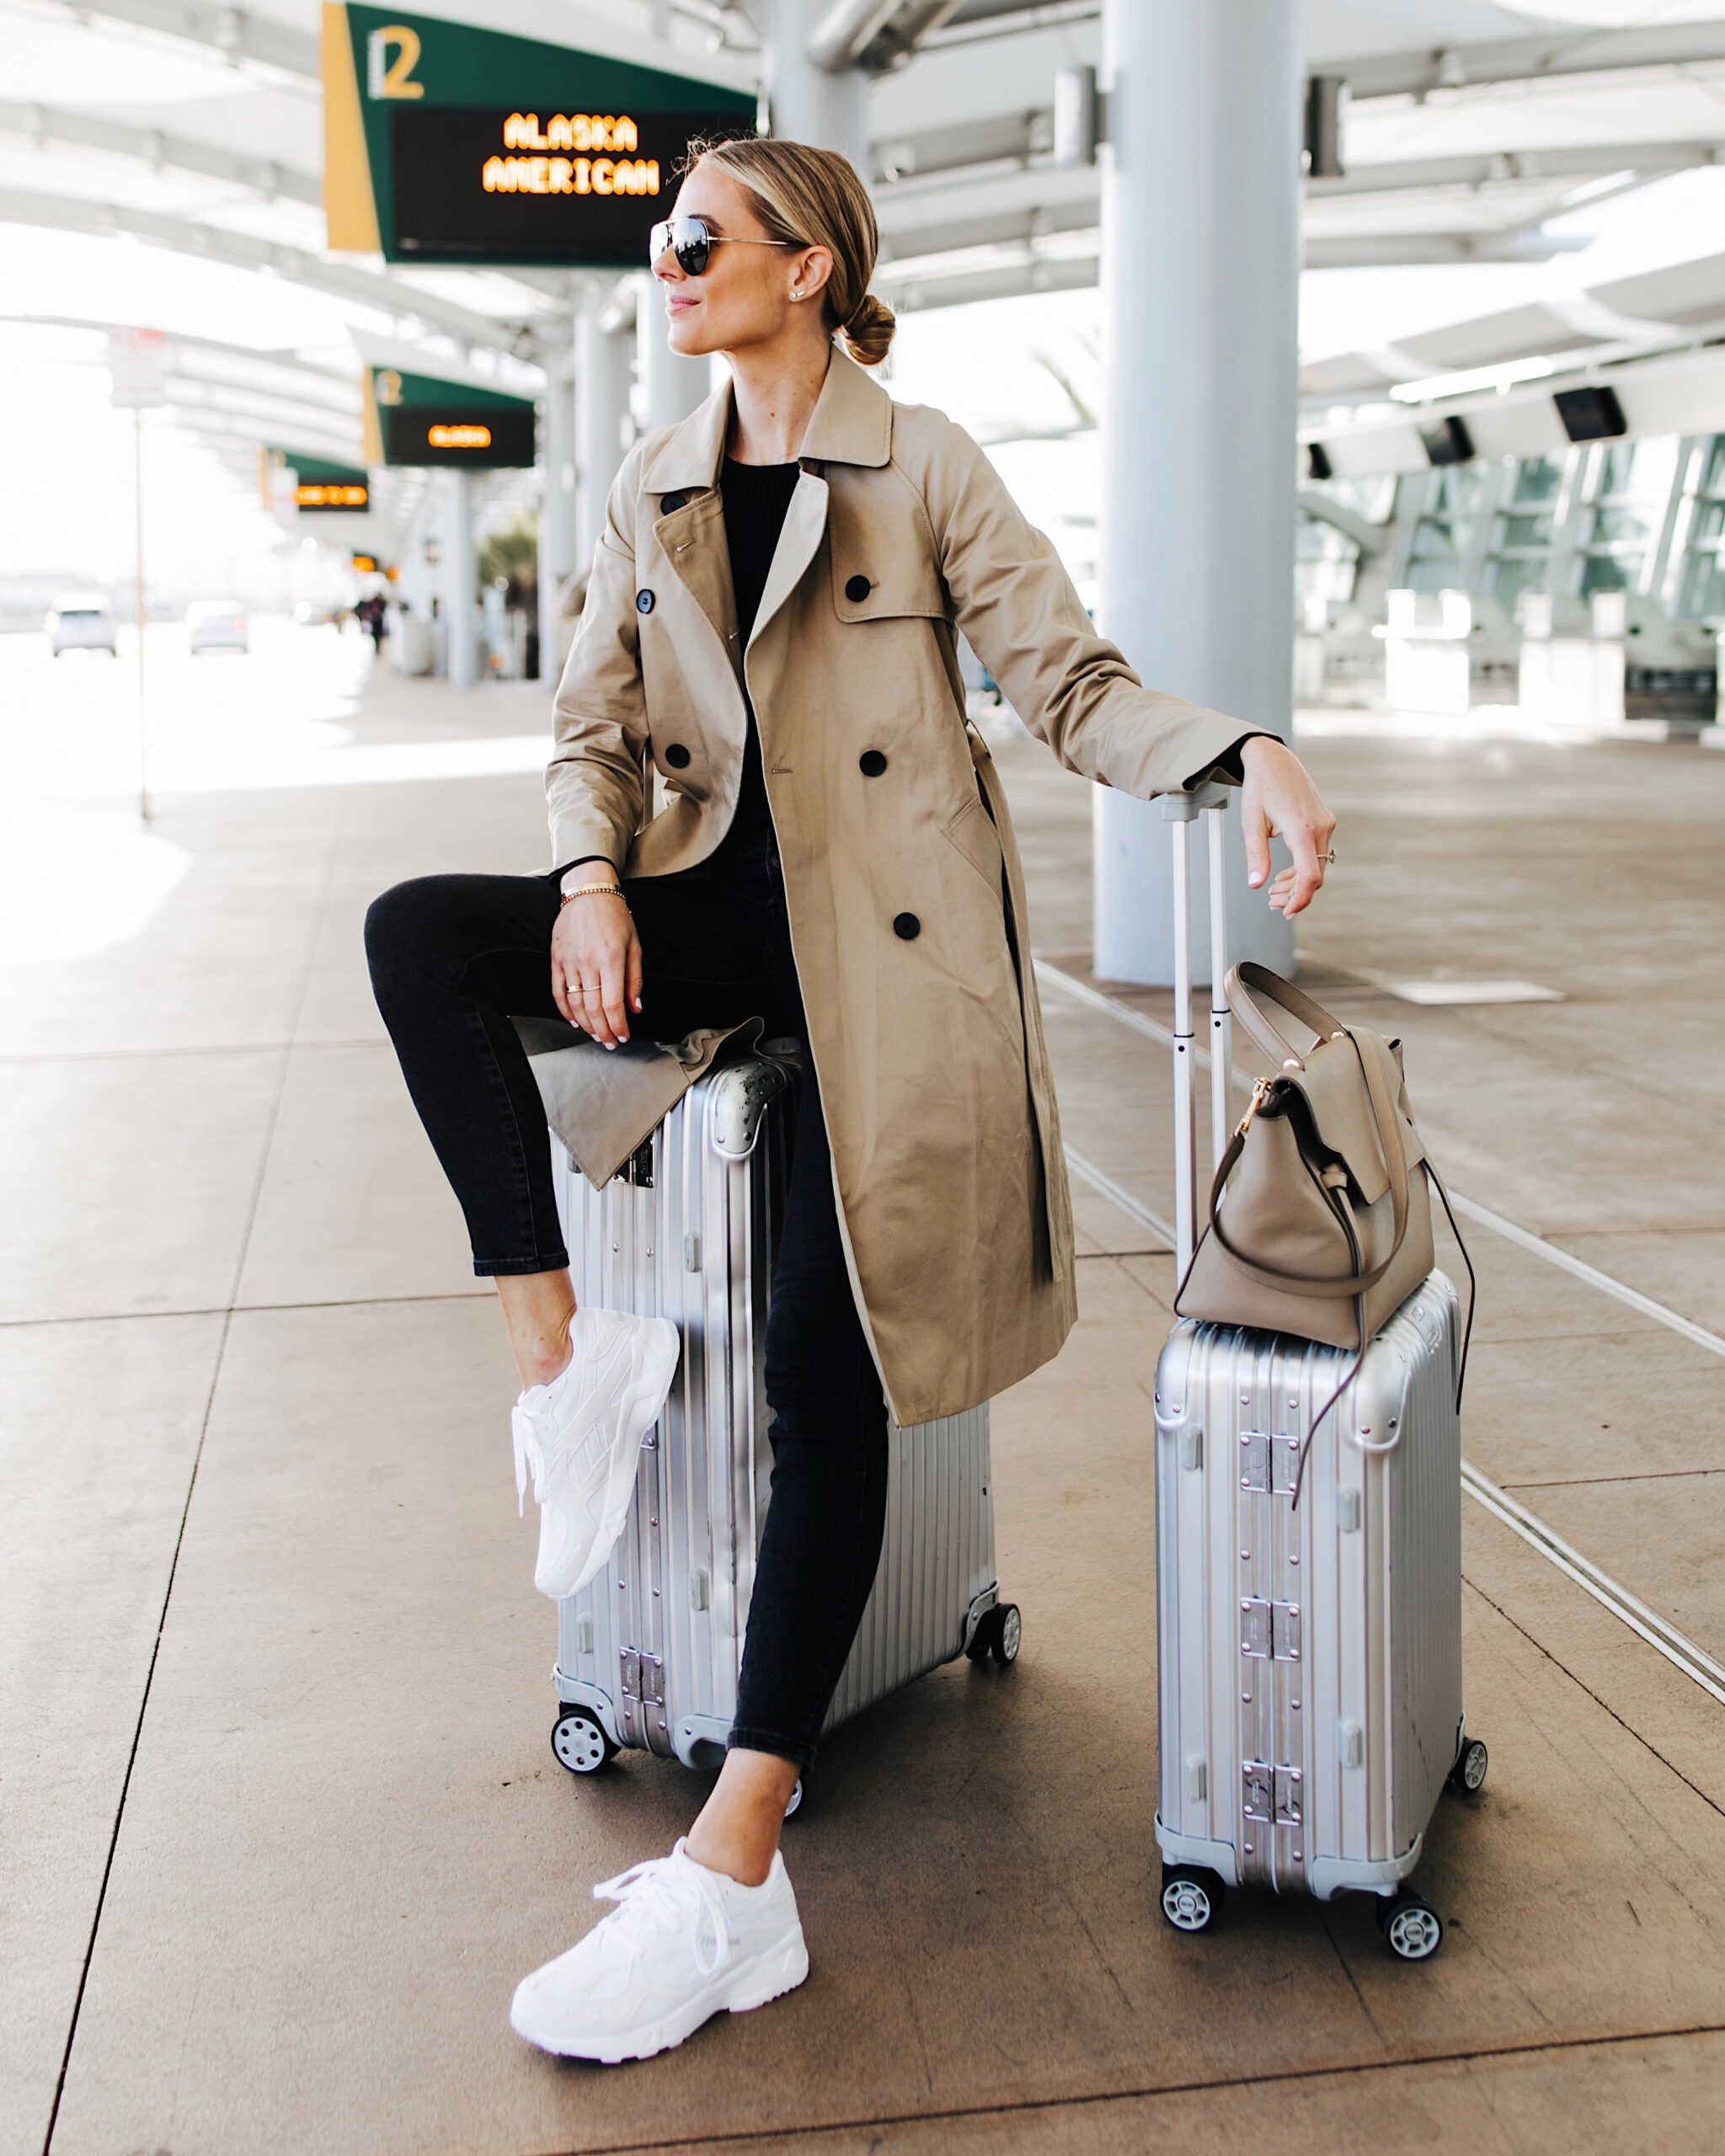 The Best Faux Leather Pieces In My Wardrobe - Under $150  Airport outfit,  Winter travel outfit, Louis vuitton luggage